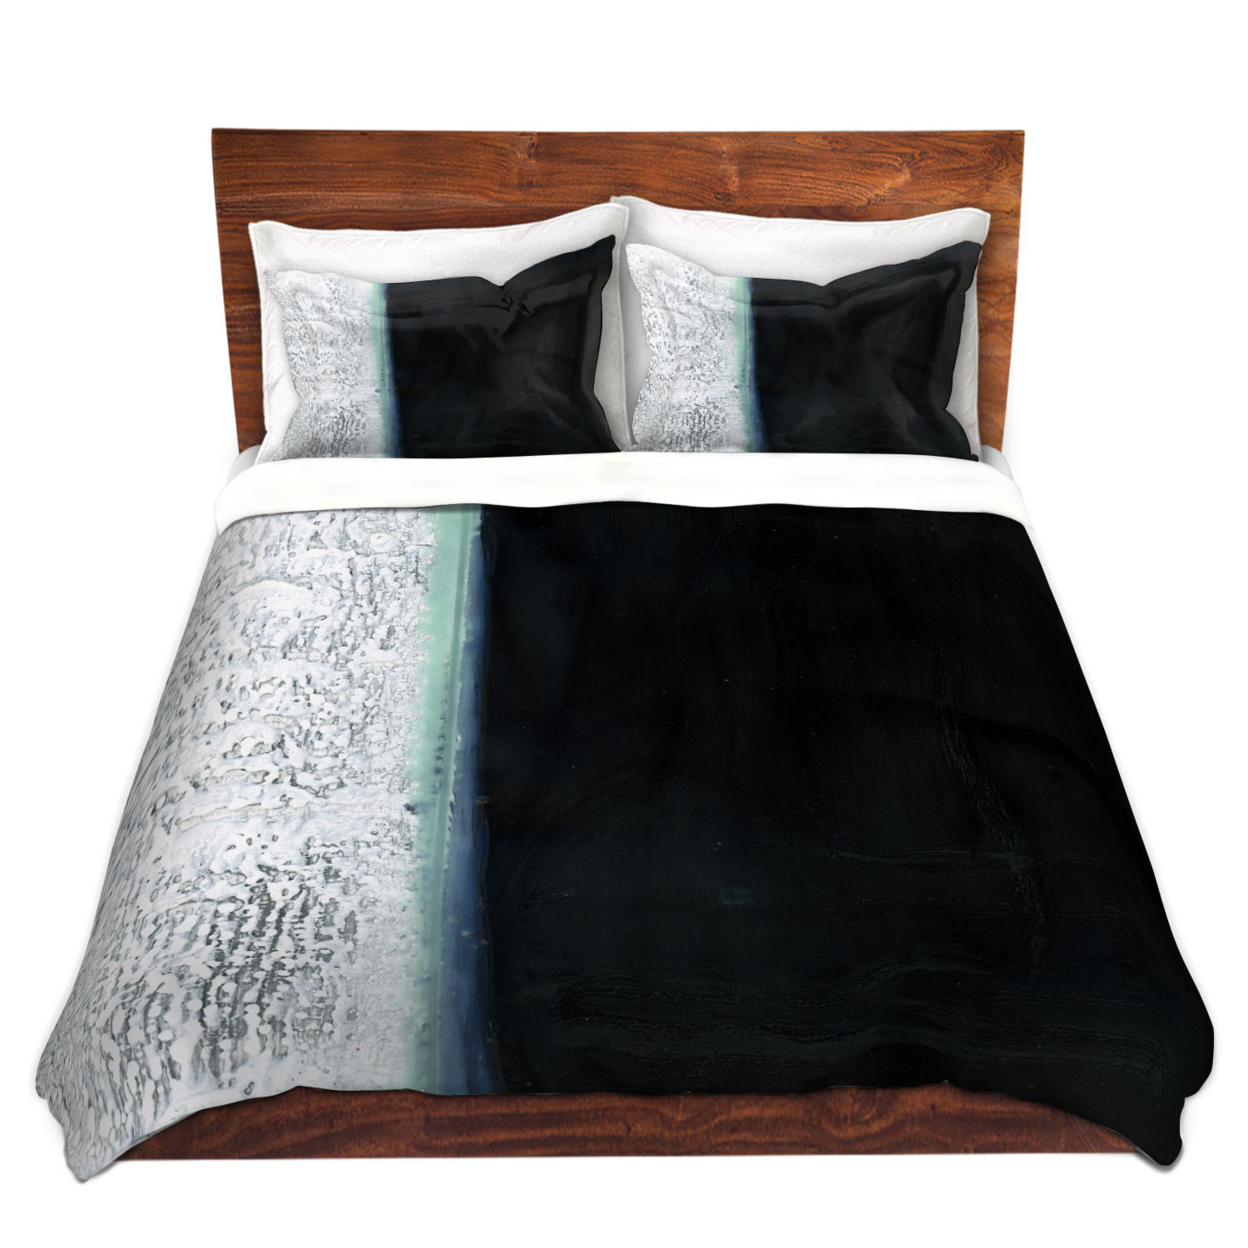 DiaNoche Designs DiaNoche Microfiber Duvet Covers by Dora Ficher - Not Always Black or White 9